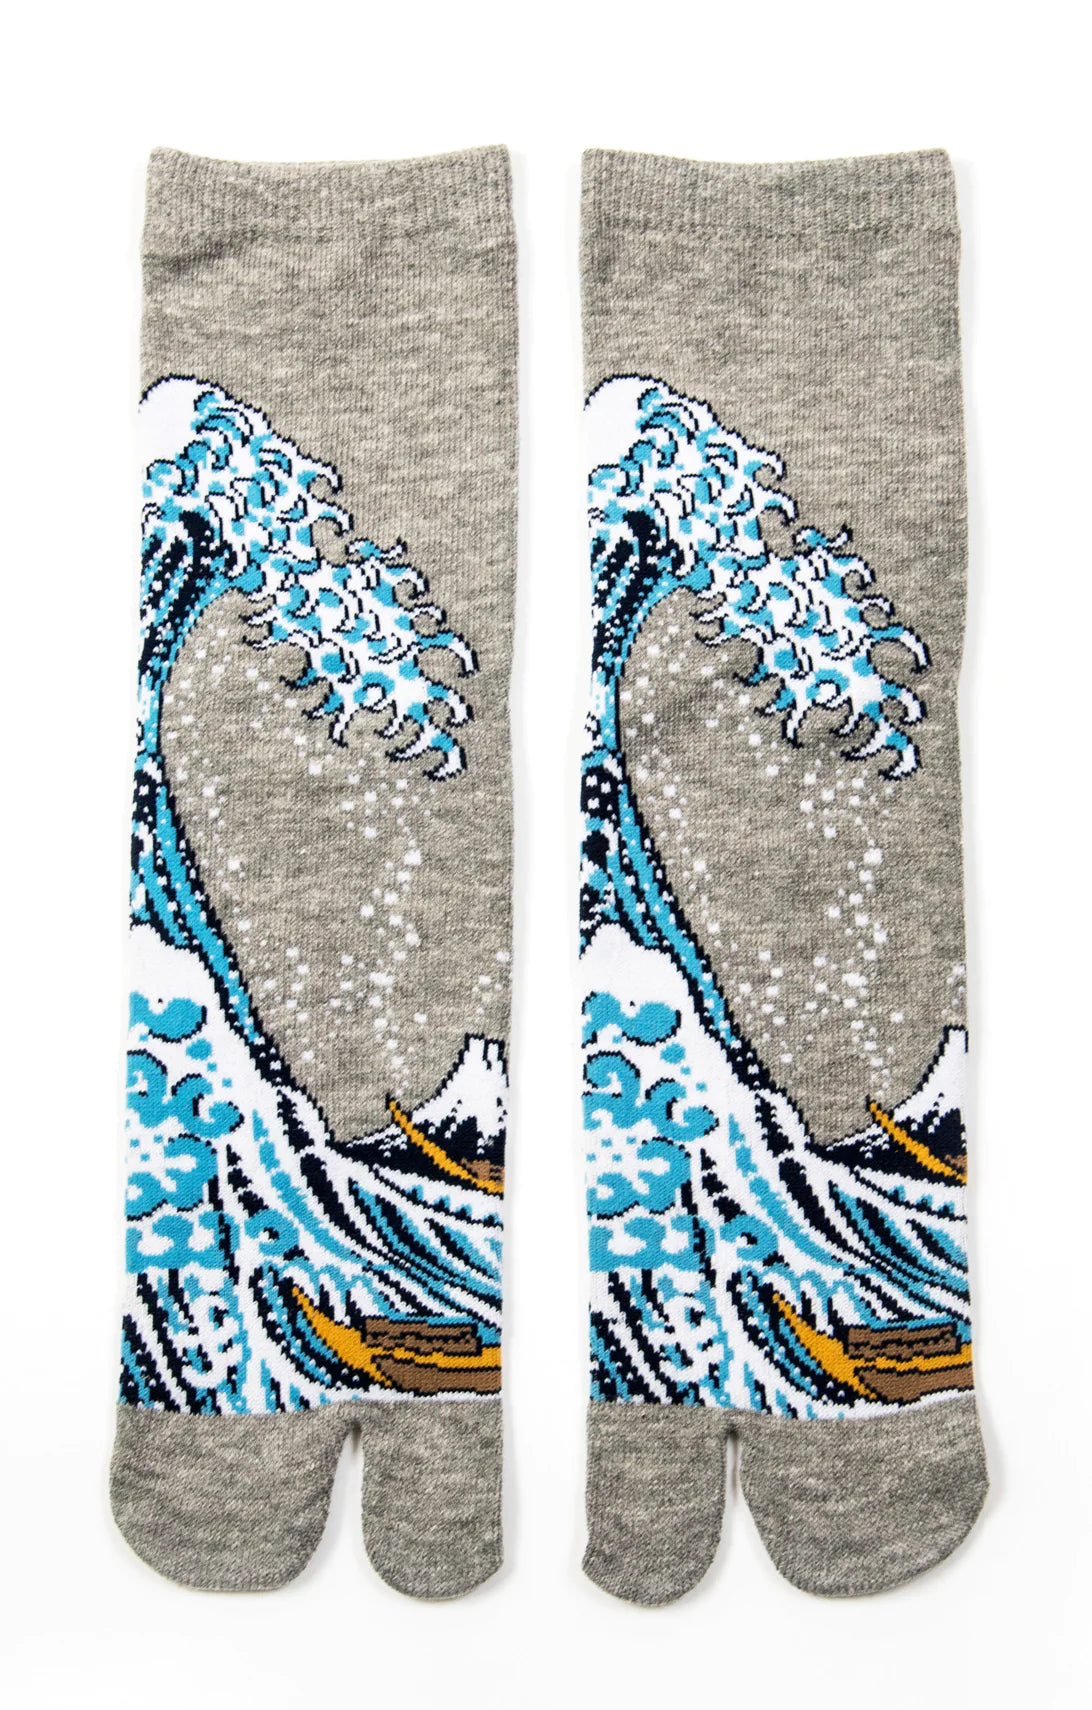 This is a photo of the product name Hokusai The Great Wave Tabi Socks Light Grey, which is inspired by a painting by Hokusai Katsushika of Japan by NINJA SOCKS